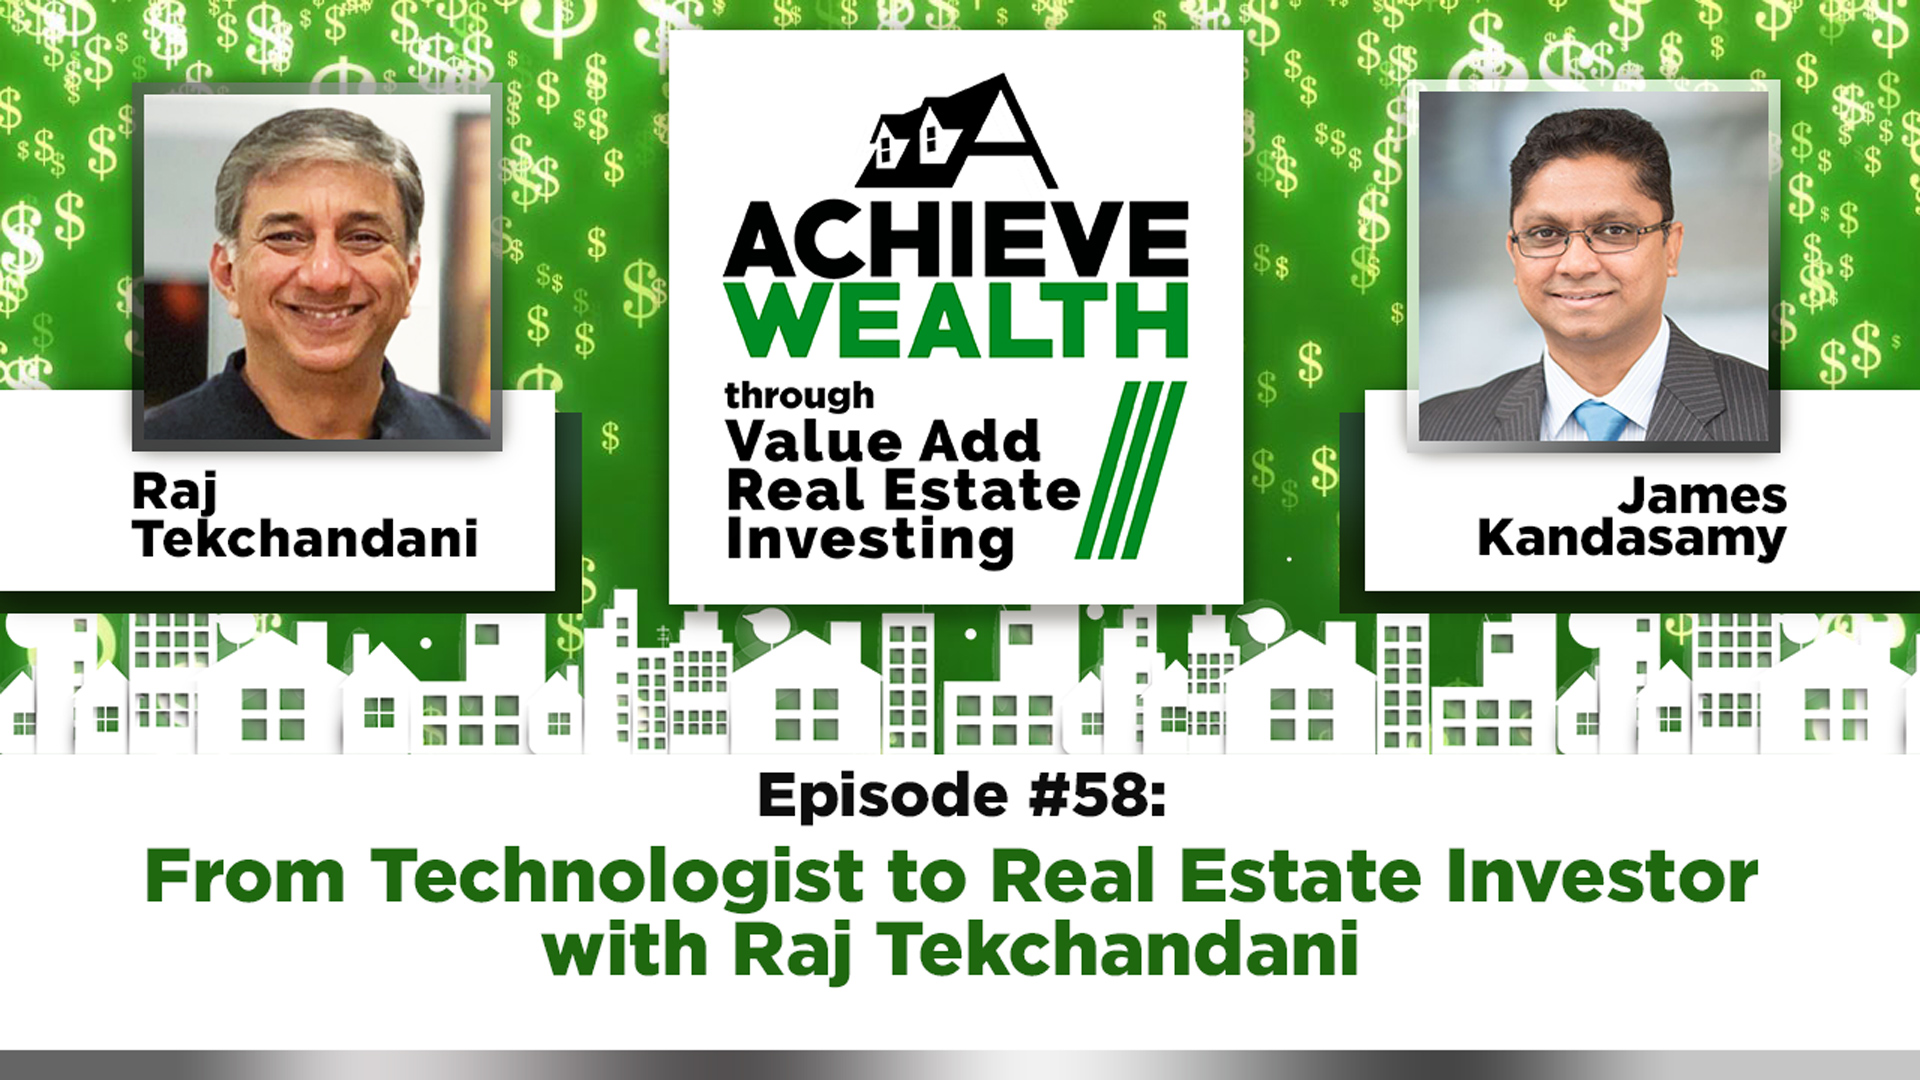 Ep#58 From Technologist to Real Estate Investor with Raj Tekchandani